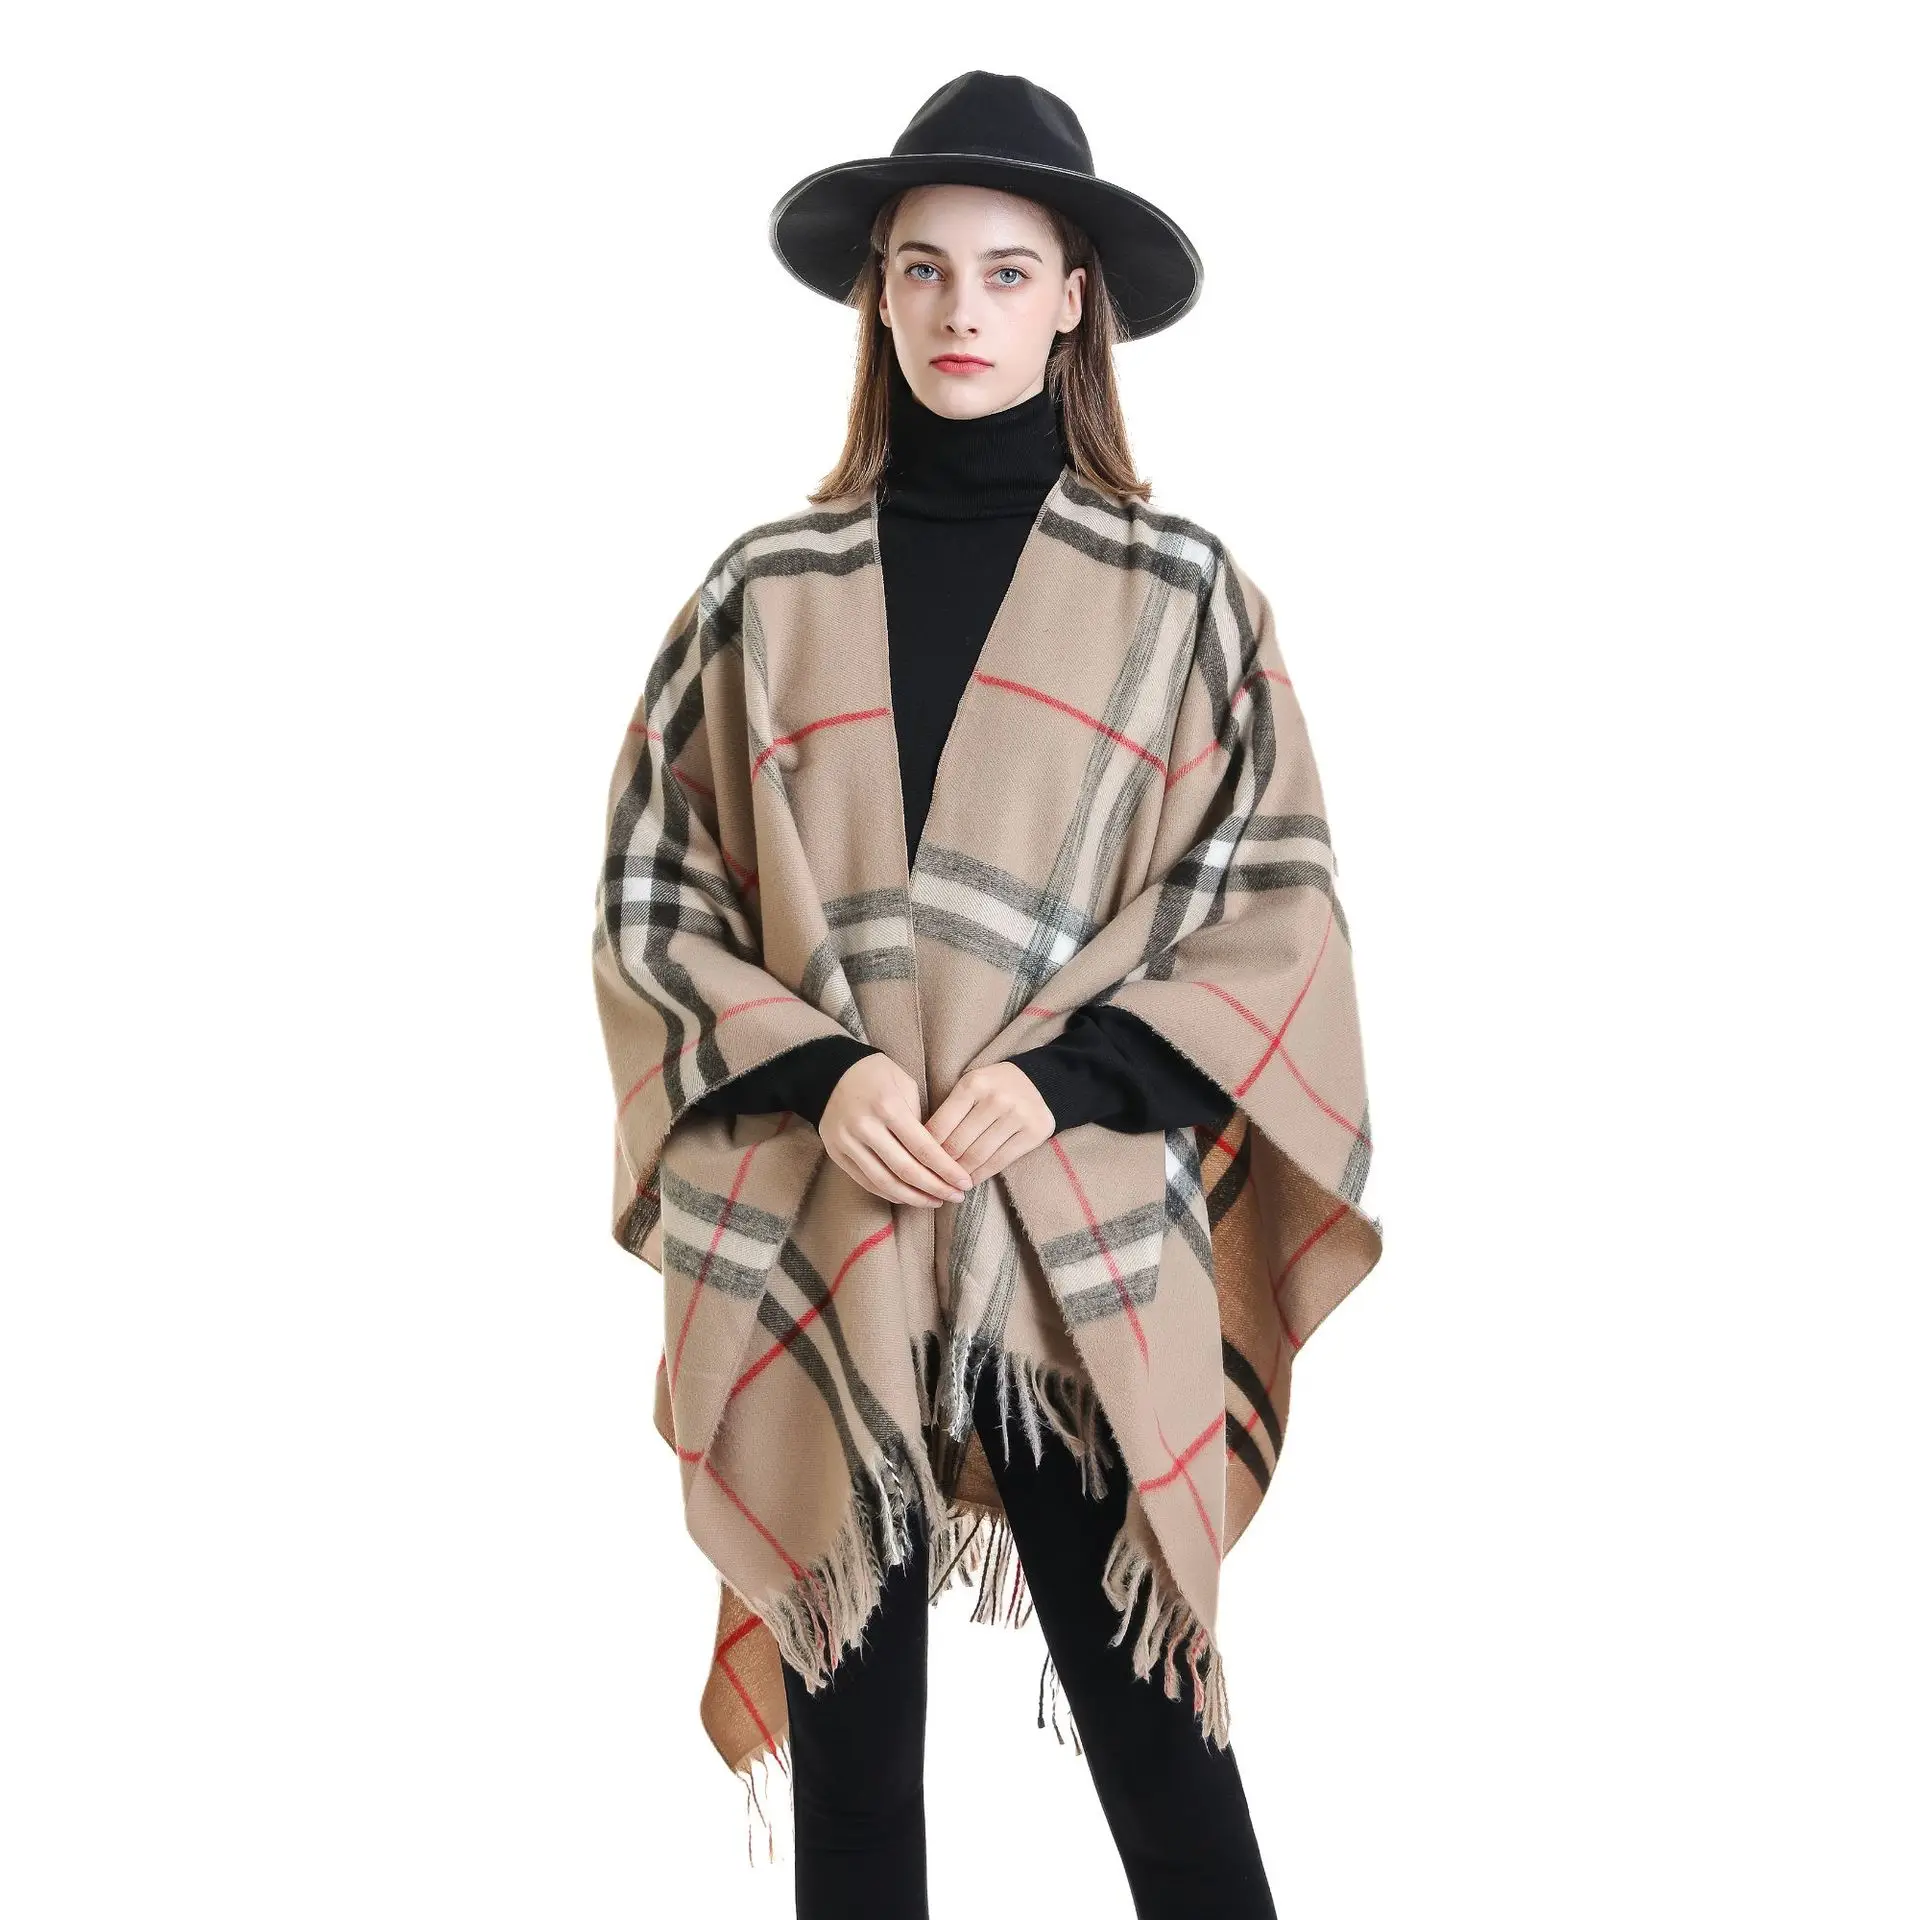 Women Cashmere Feeling Shawl Lady Classic Plaid Cape Spring Autumn Retro Cardigan Winter Cloak with Tassels Soft Large Blanket women spring autumn shawl lady knitted tassels cardigan loose fall winter wrap solid color woolen yarn scarf wholesale fpwp19